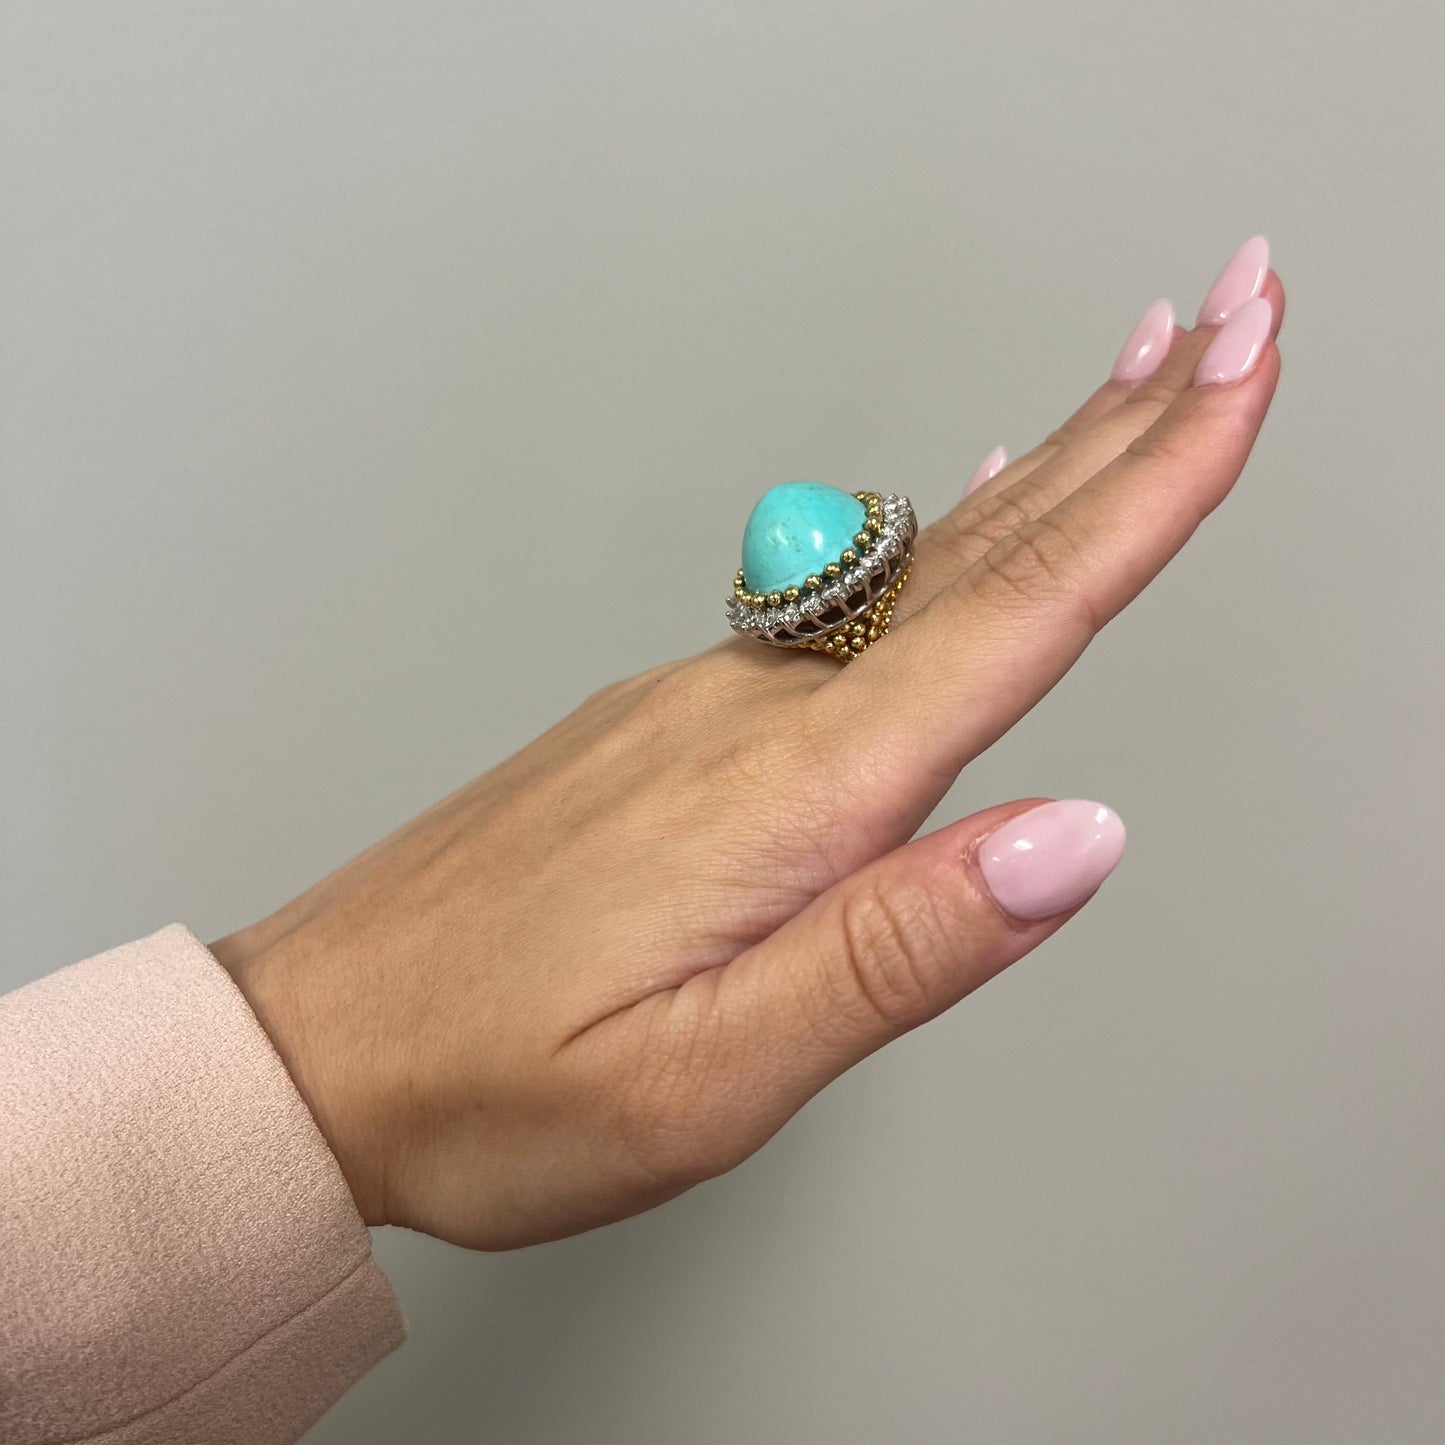 1970s 18KT Yellow Gold Turquoise & Diamond Cocktail Ring side view worn on hand